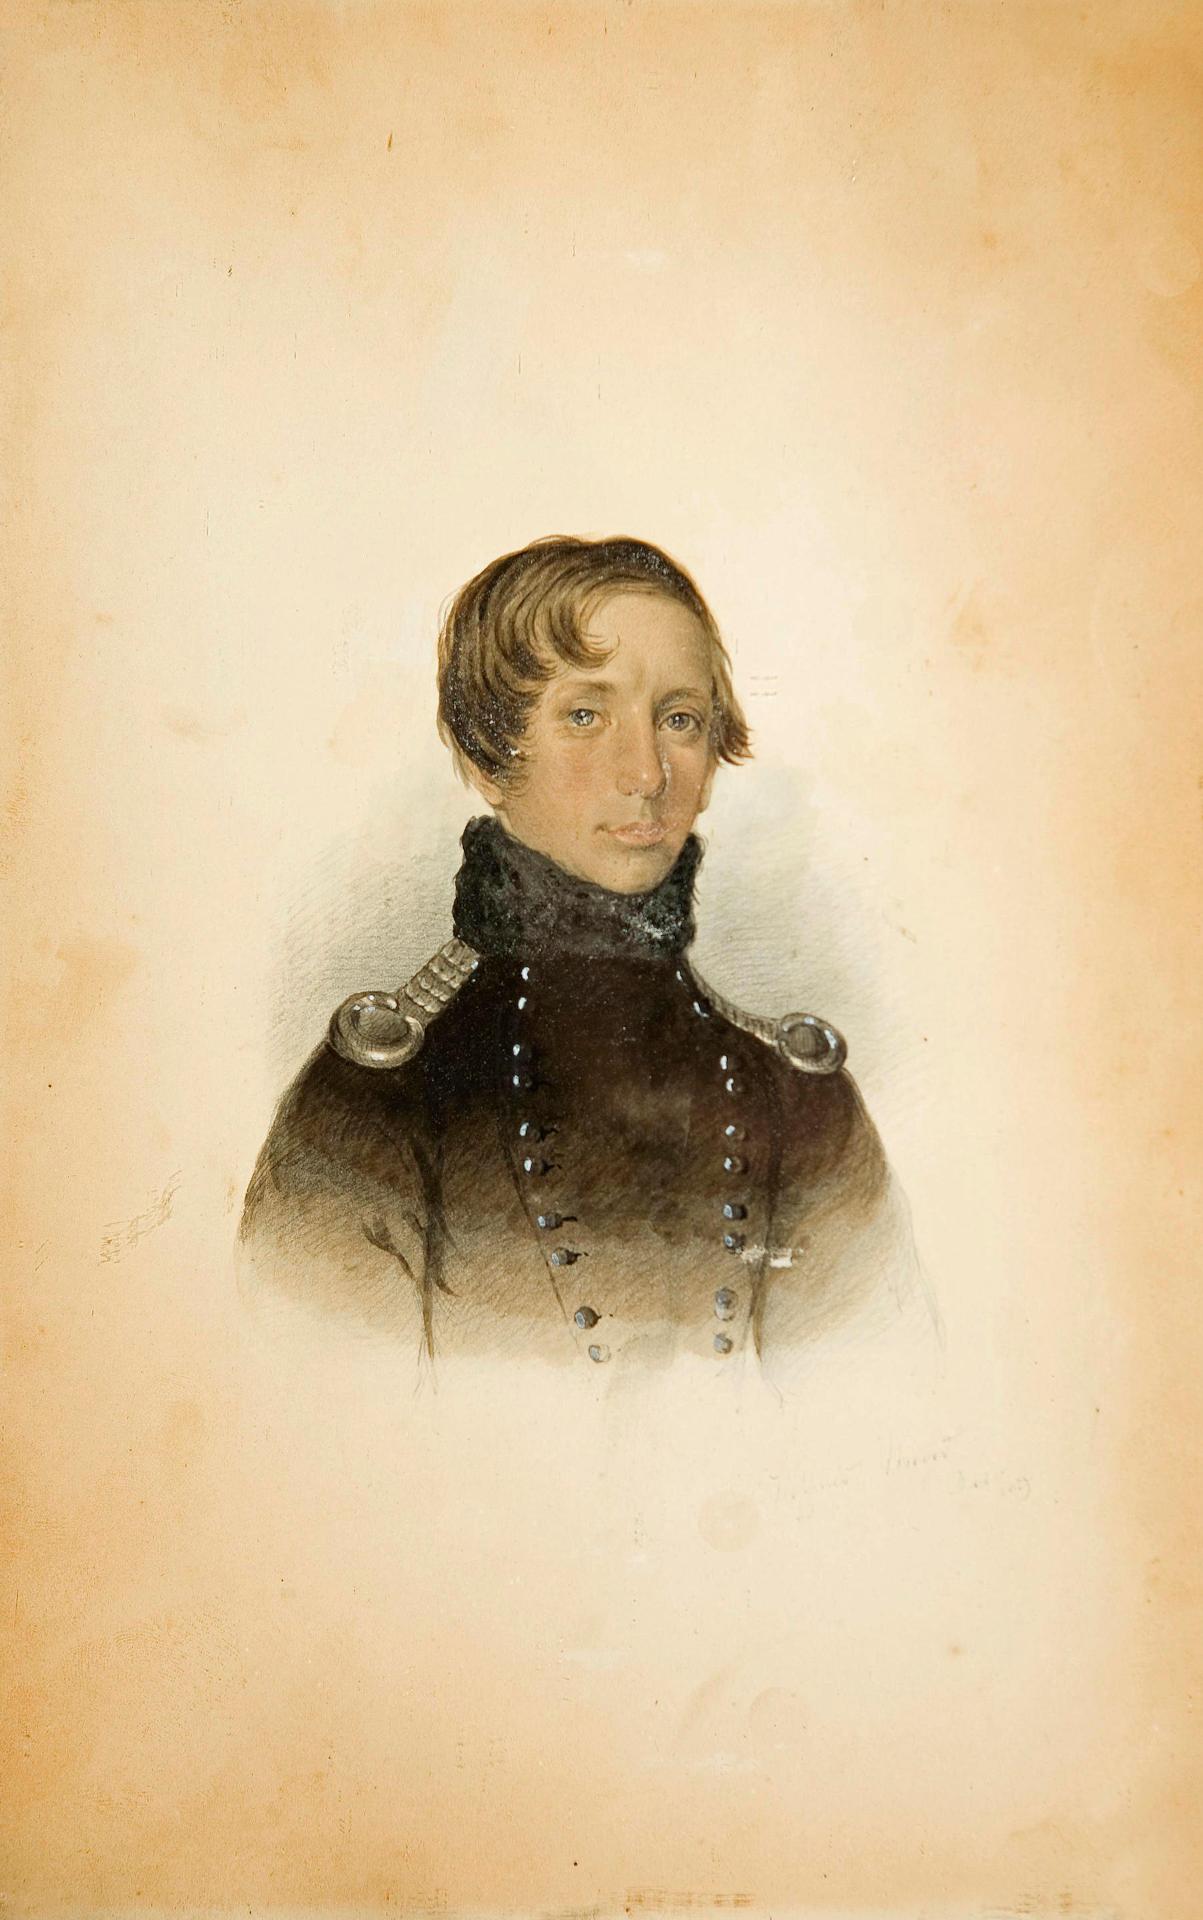 Hoppner Francis Meyer (1832-1862) - Portrait of a young man wearing the uniform of an officer of the First King's Dragoon Guards